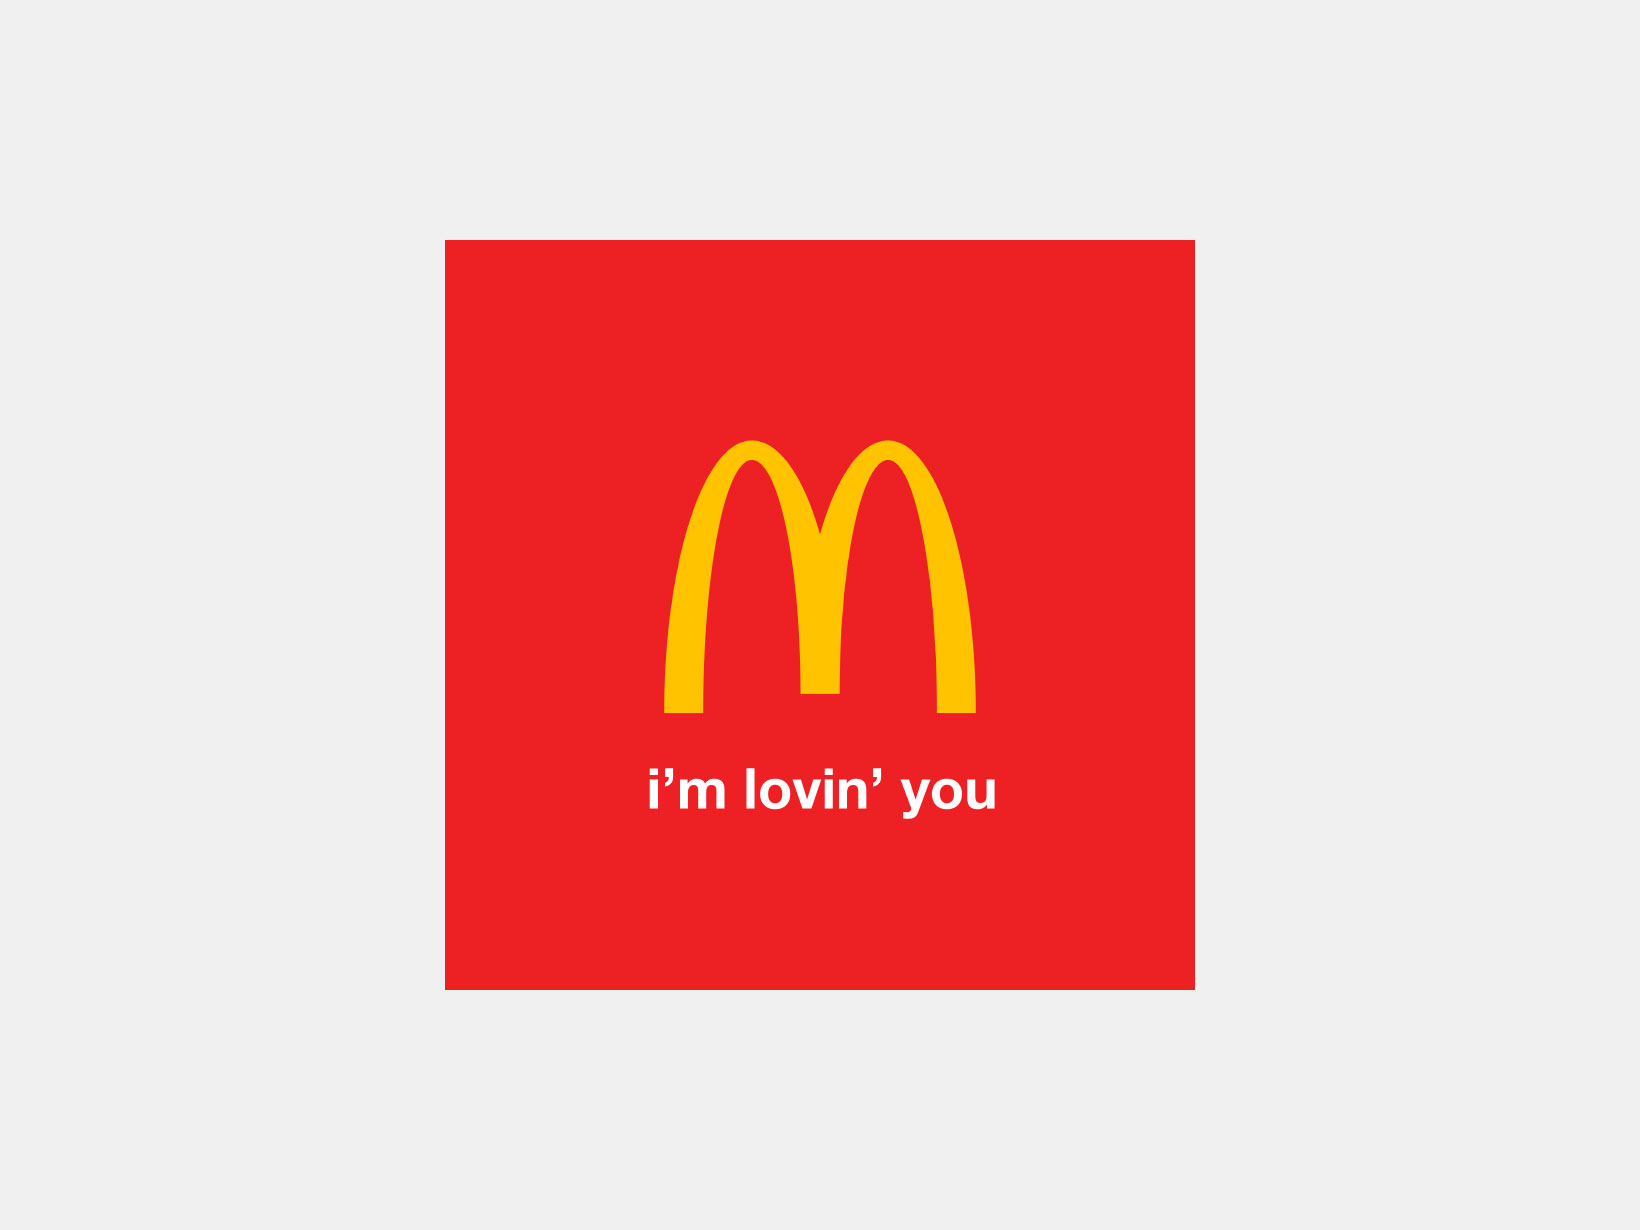 McDonald's golden arch logo with 